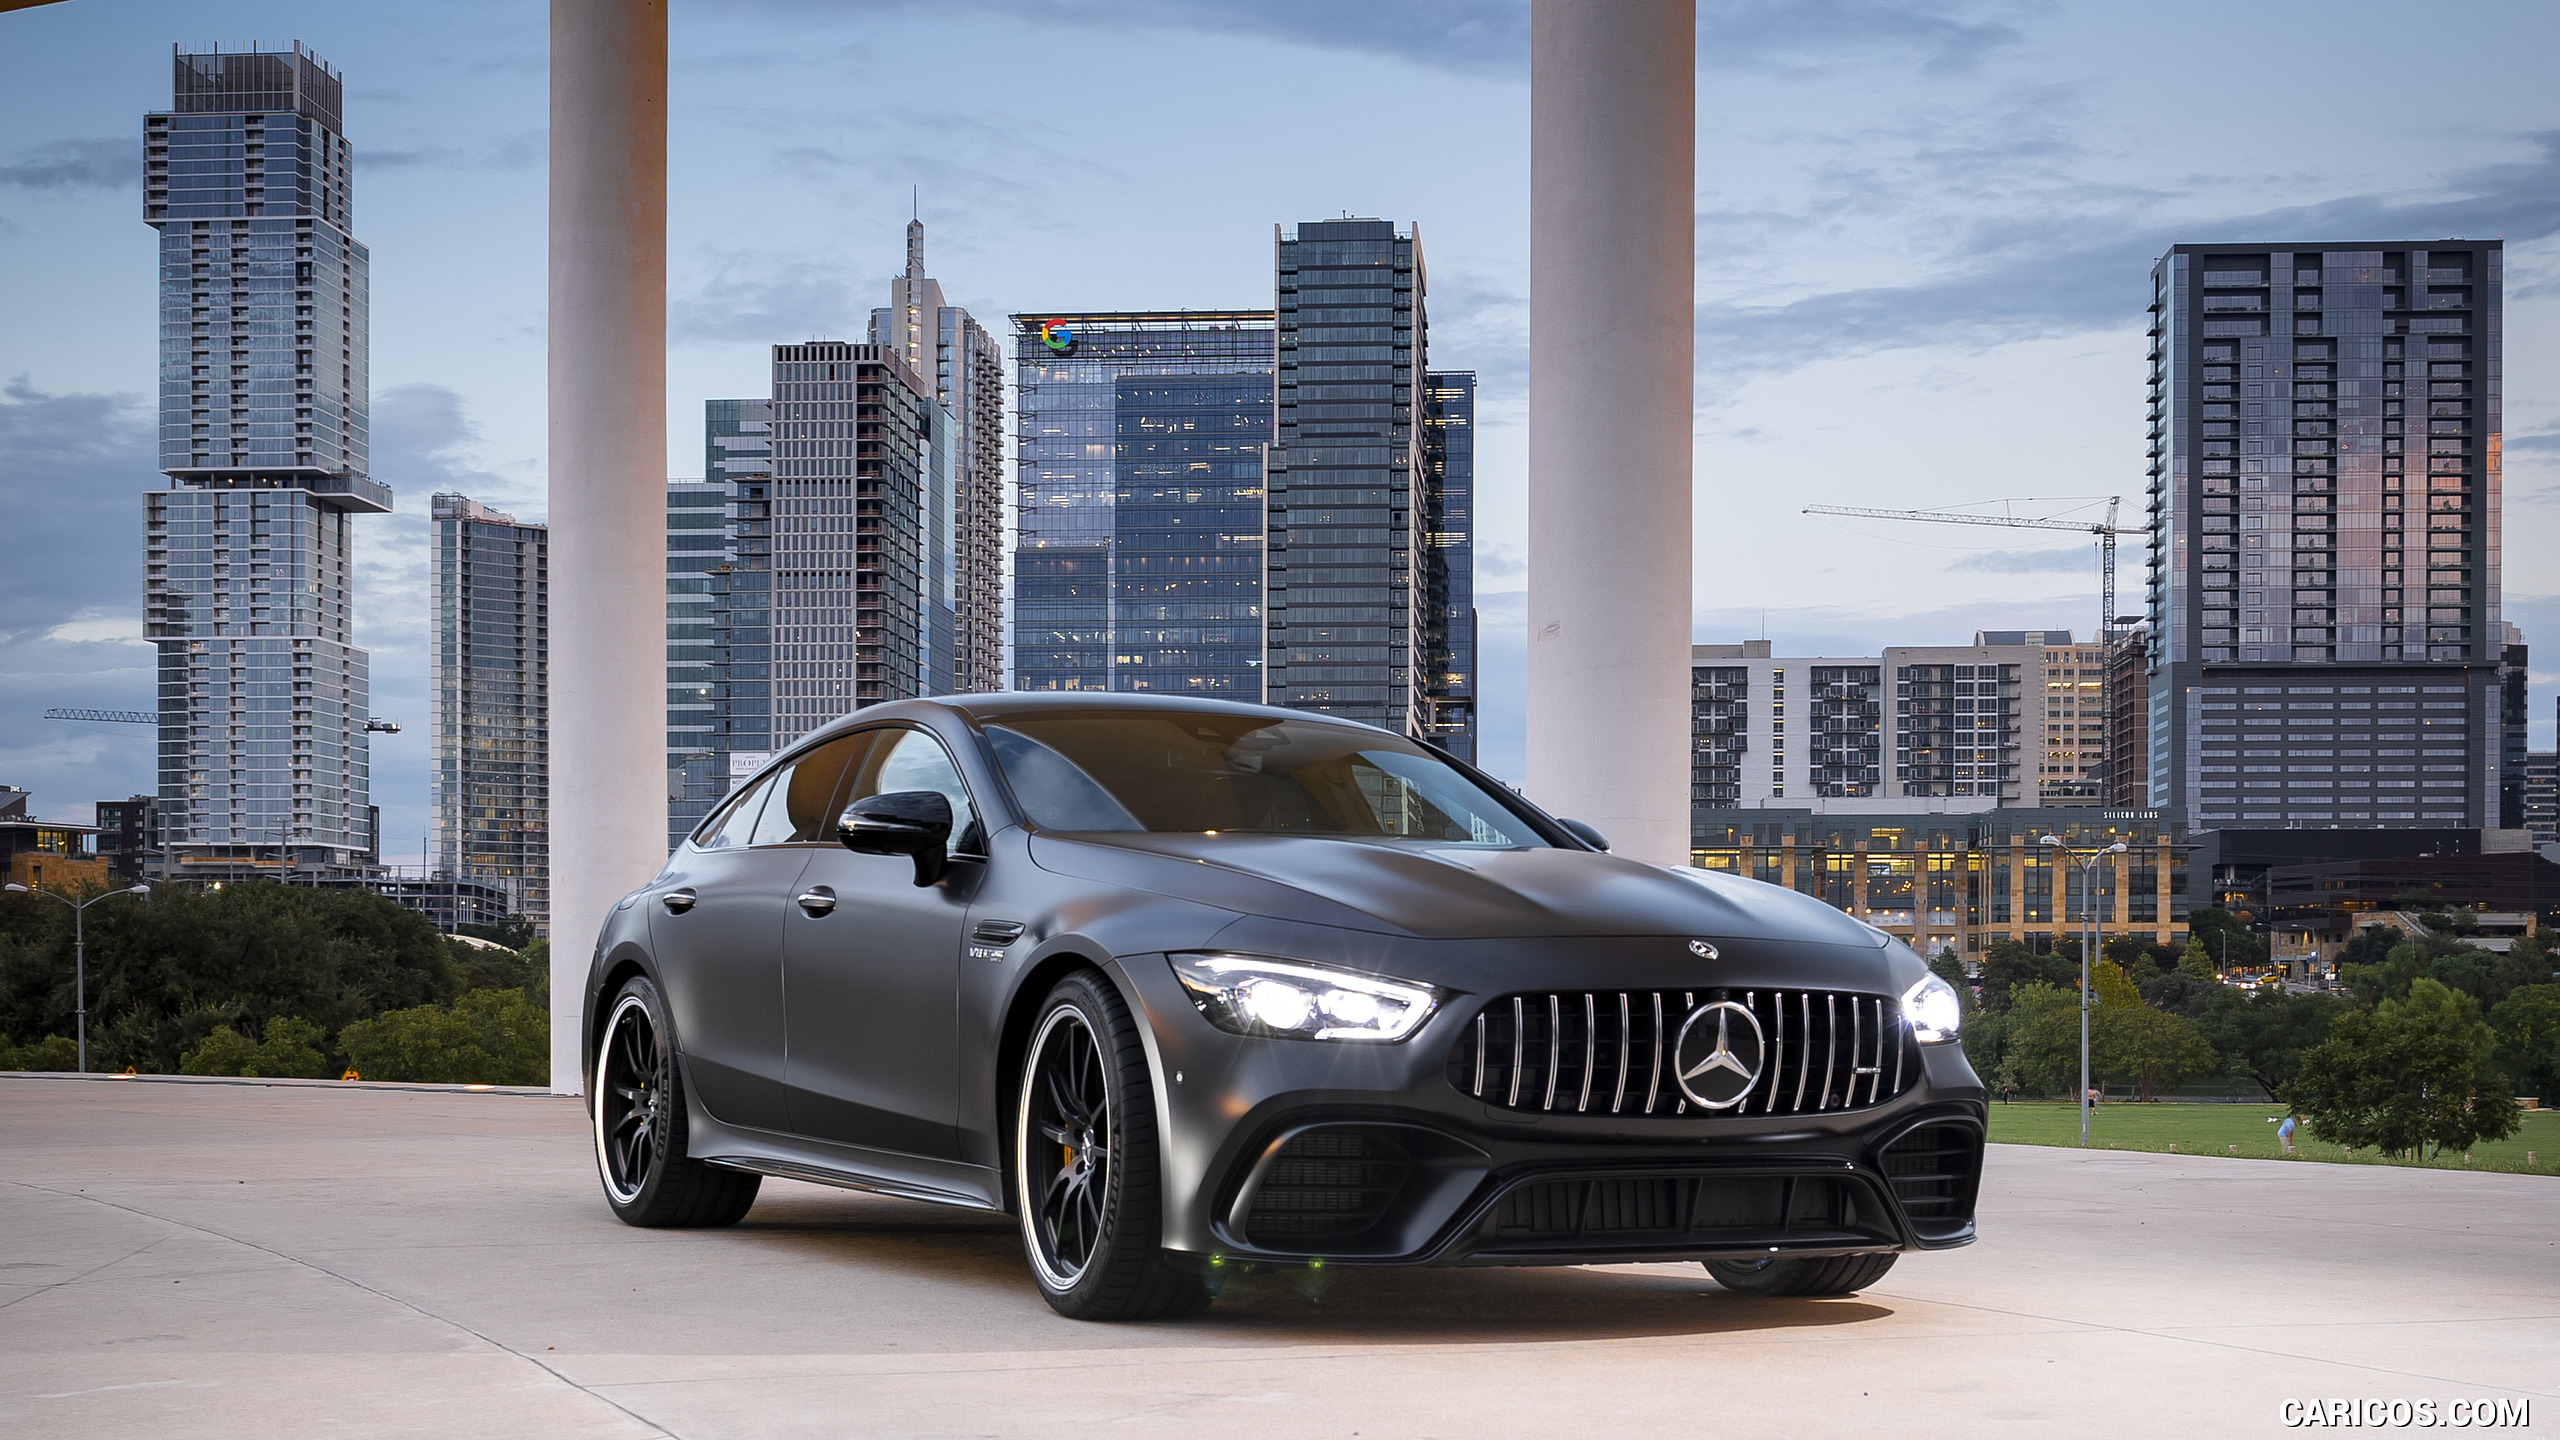 2019 Mercedes-AMG GT 63 S 4MATIC+ 4-Door Coupe - Front Three-Quarter, #212 of 427